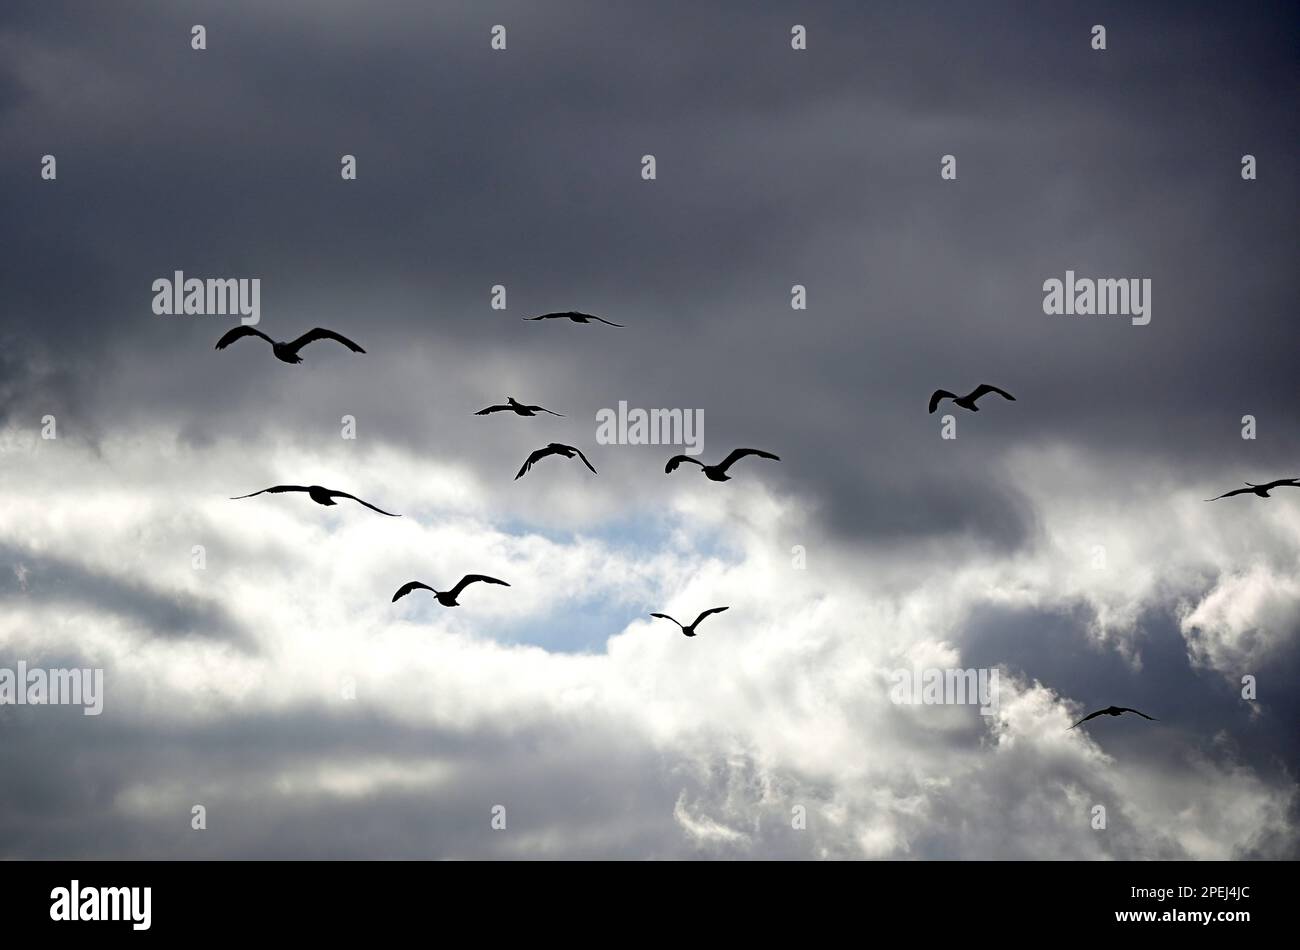 Flying seagulls against sstormy background, Strand, South Africa. Stock Photo